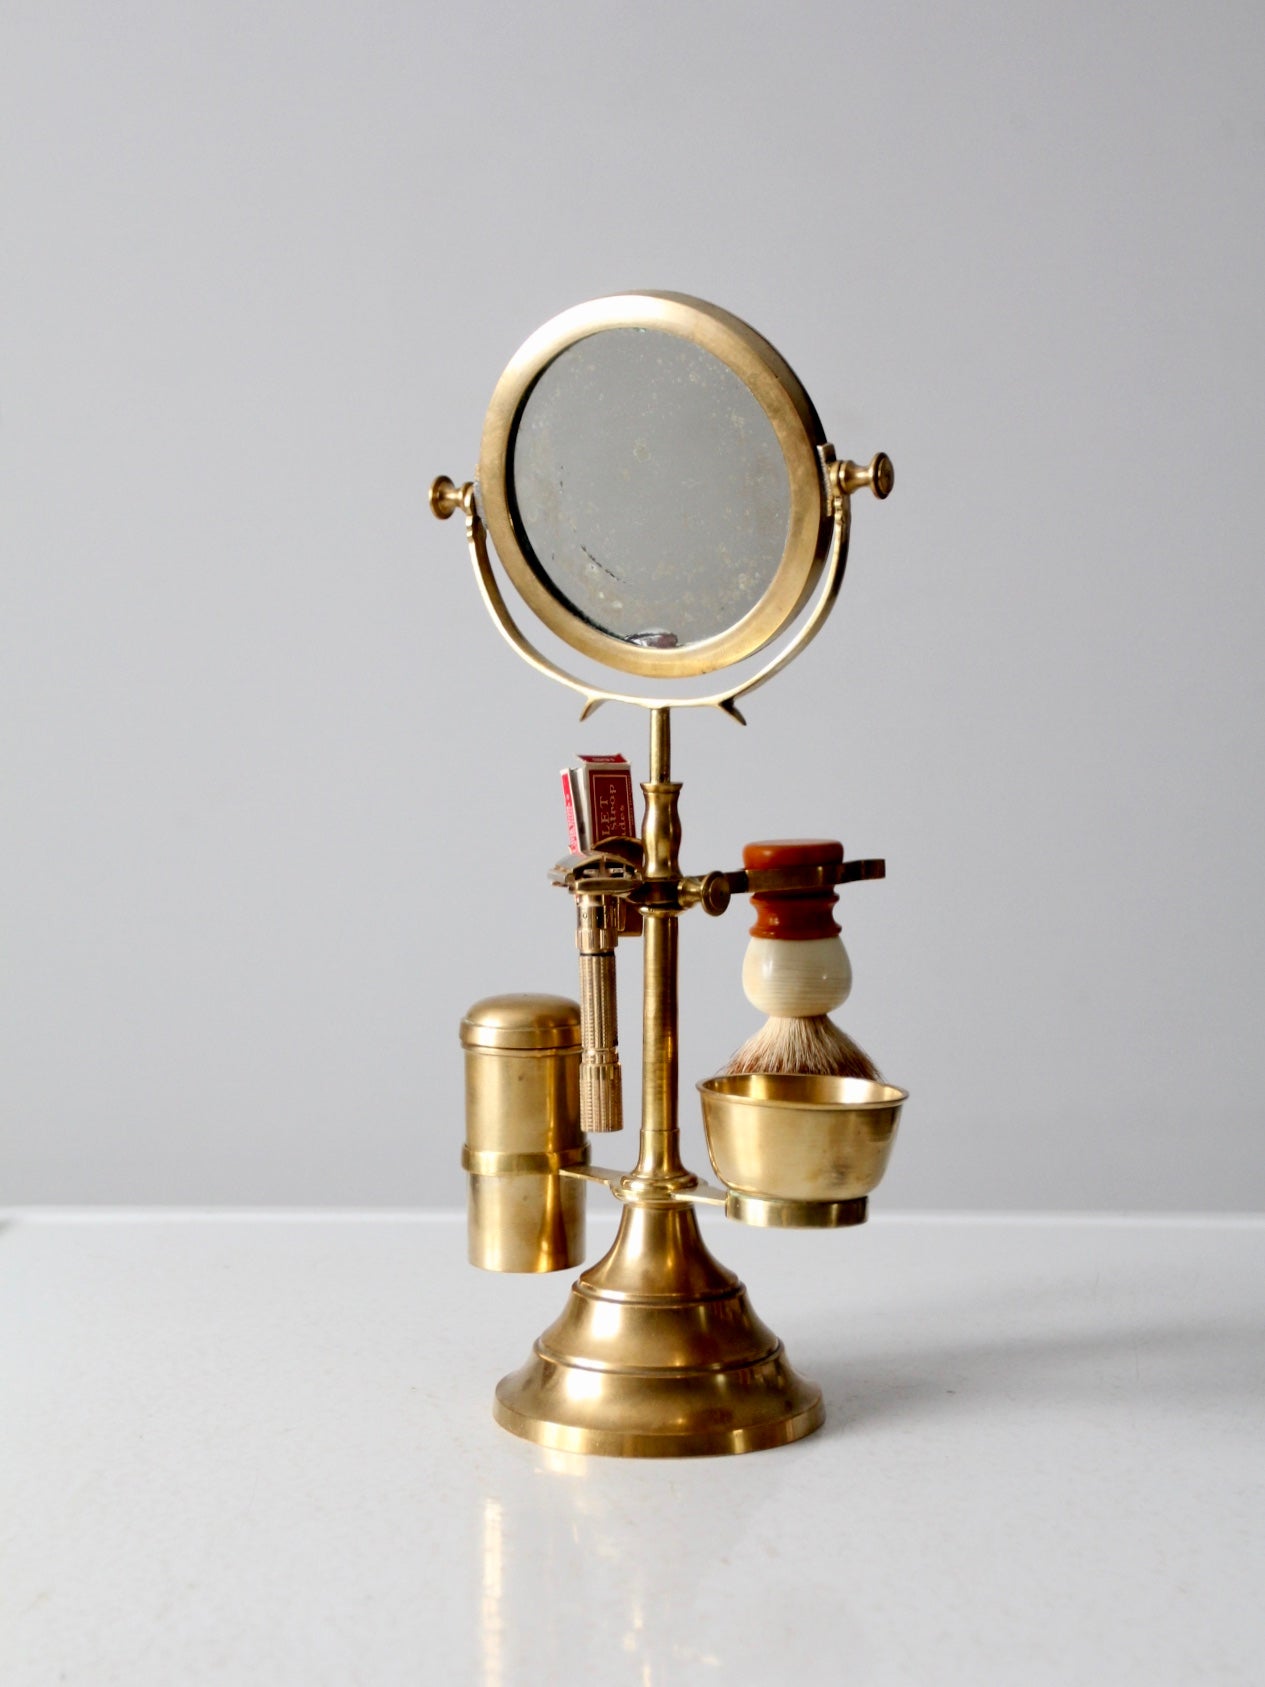 antique brass grooming stand with mirror and Gillette razor